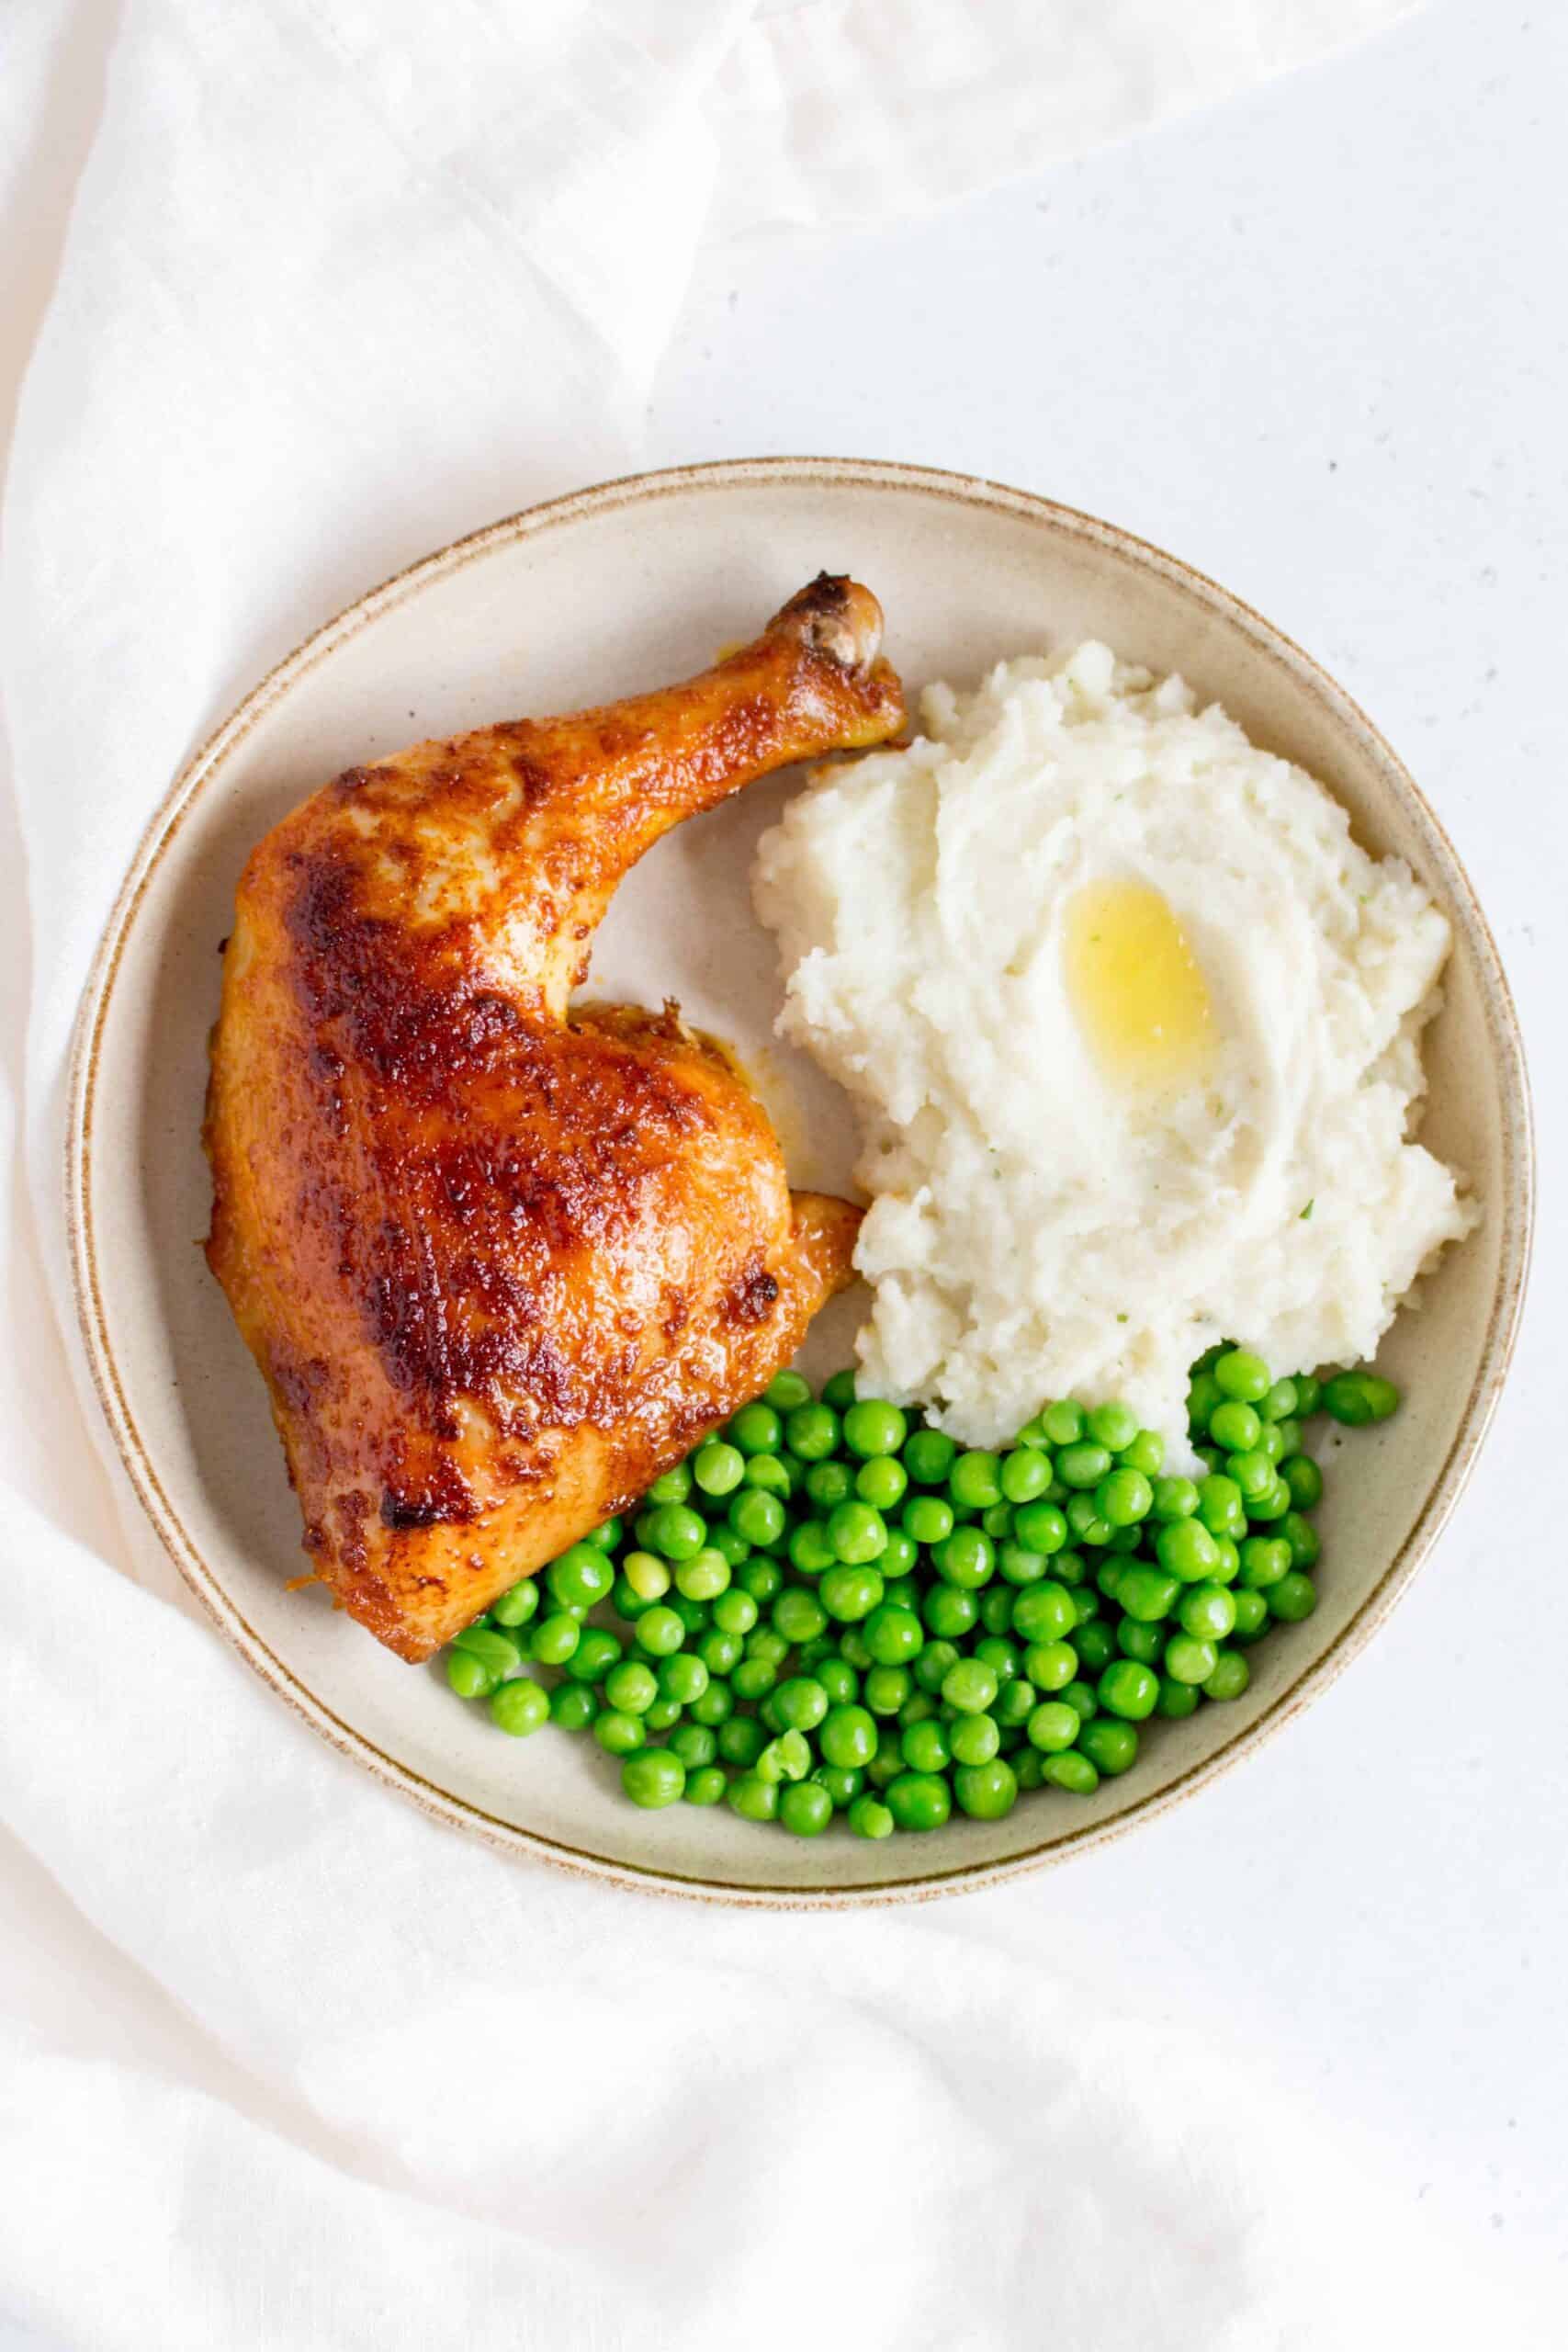 plate with a oven roasted chicken quarter with mashed potatoes and peas